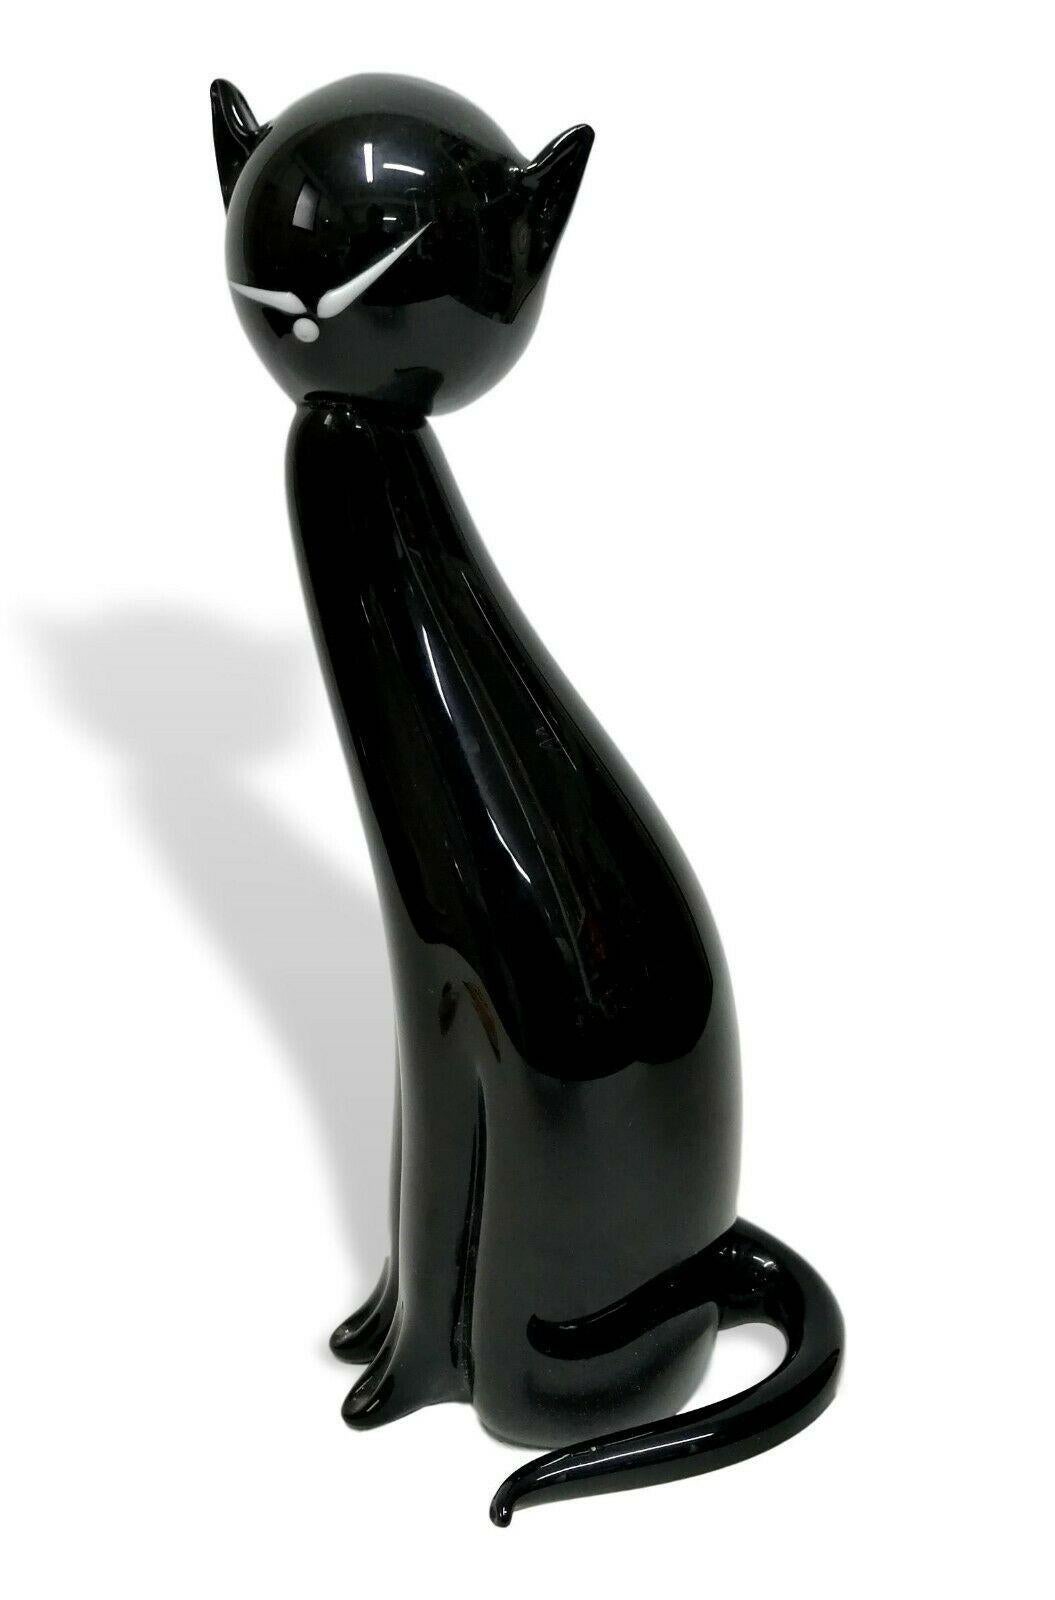 Late 20th Century Vintage Murano Glass Sculpture, Cat Shape, Produced by La Murrina, Italy, 1970s